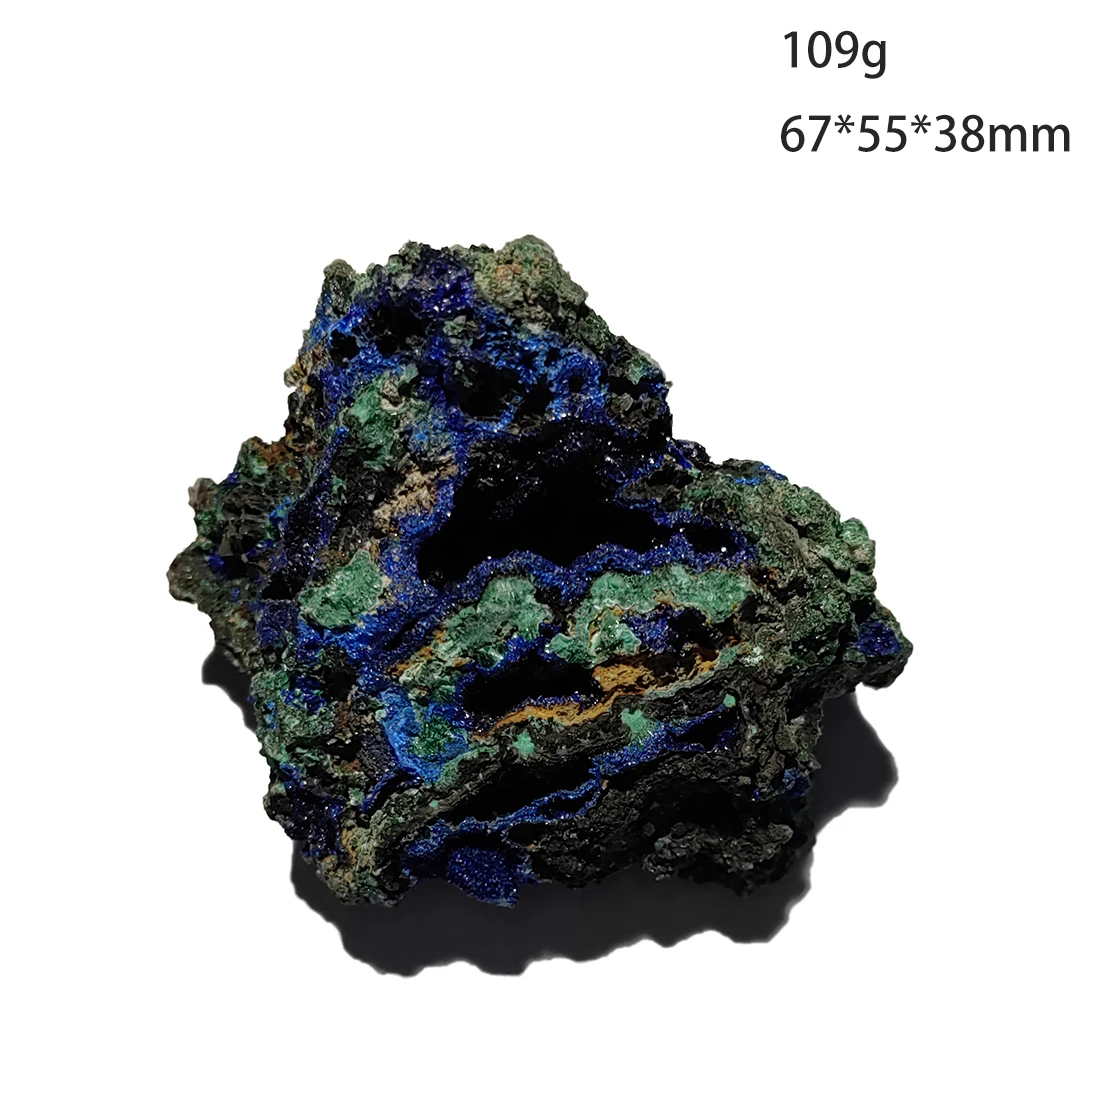 

C2-5A 100% Natural Stone Azurite Cluster Malachite Mineral Crystal Specimen Home Decoration from Anhui Province China